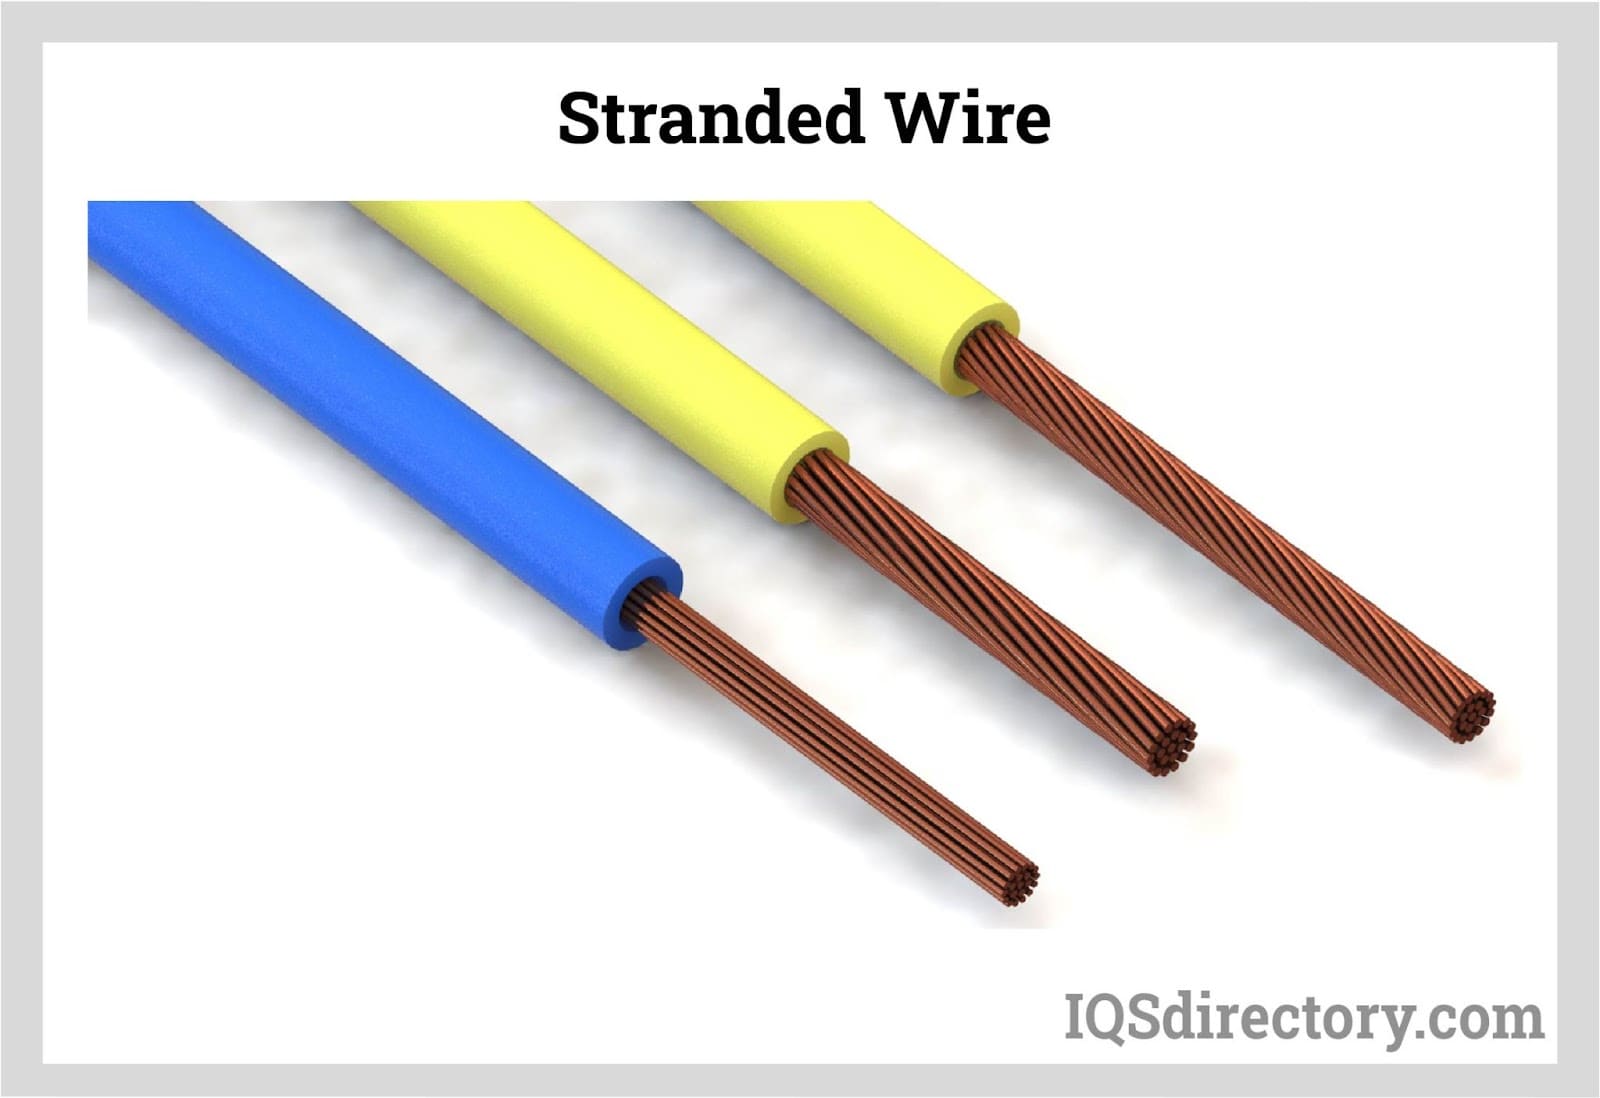 Why are US Homes Wired Using Solid Wire rather than Stranded?